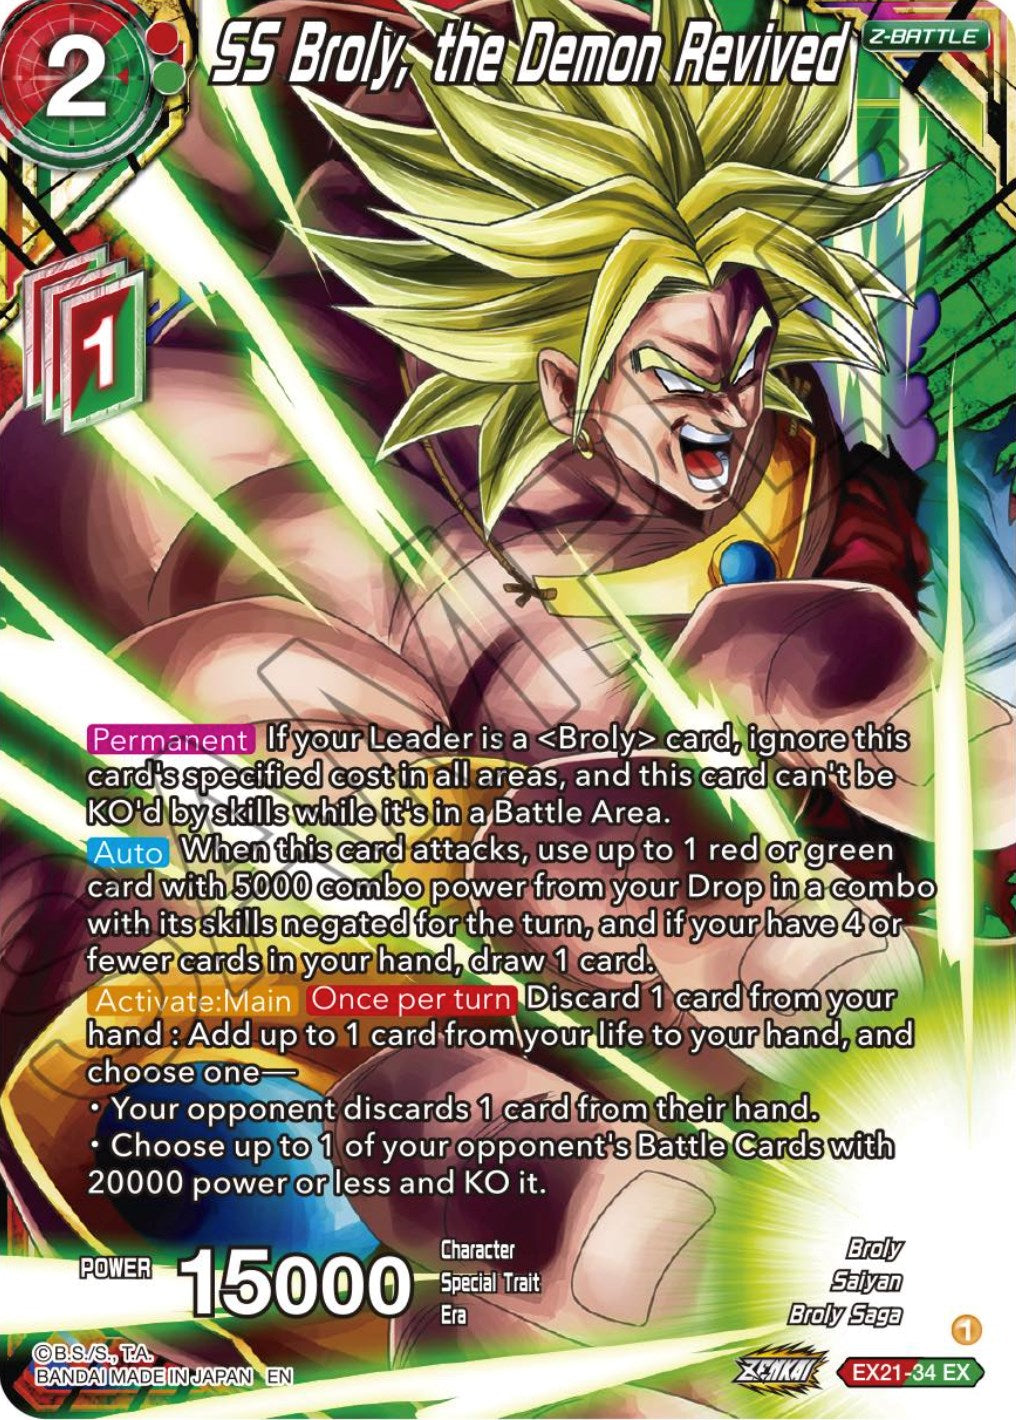 SS Broly, the Demon Revived (EX21-34) [5th Anniversary Set] | Sanctuary Gaming